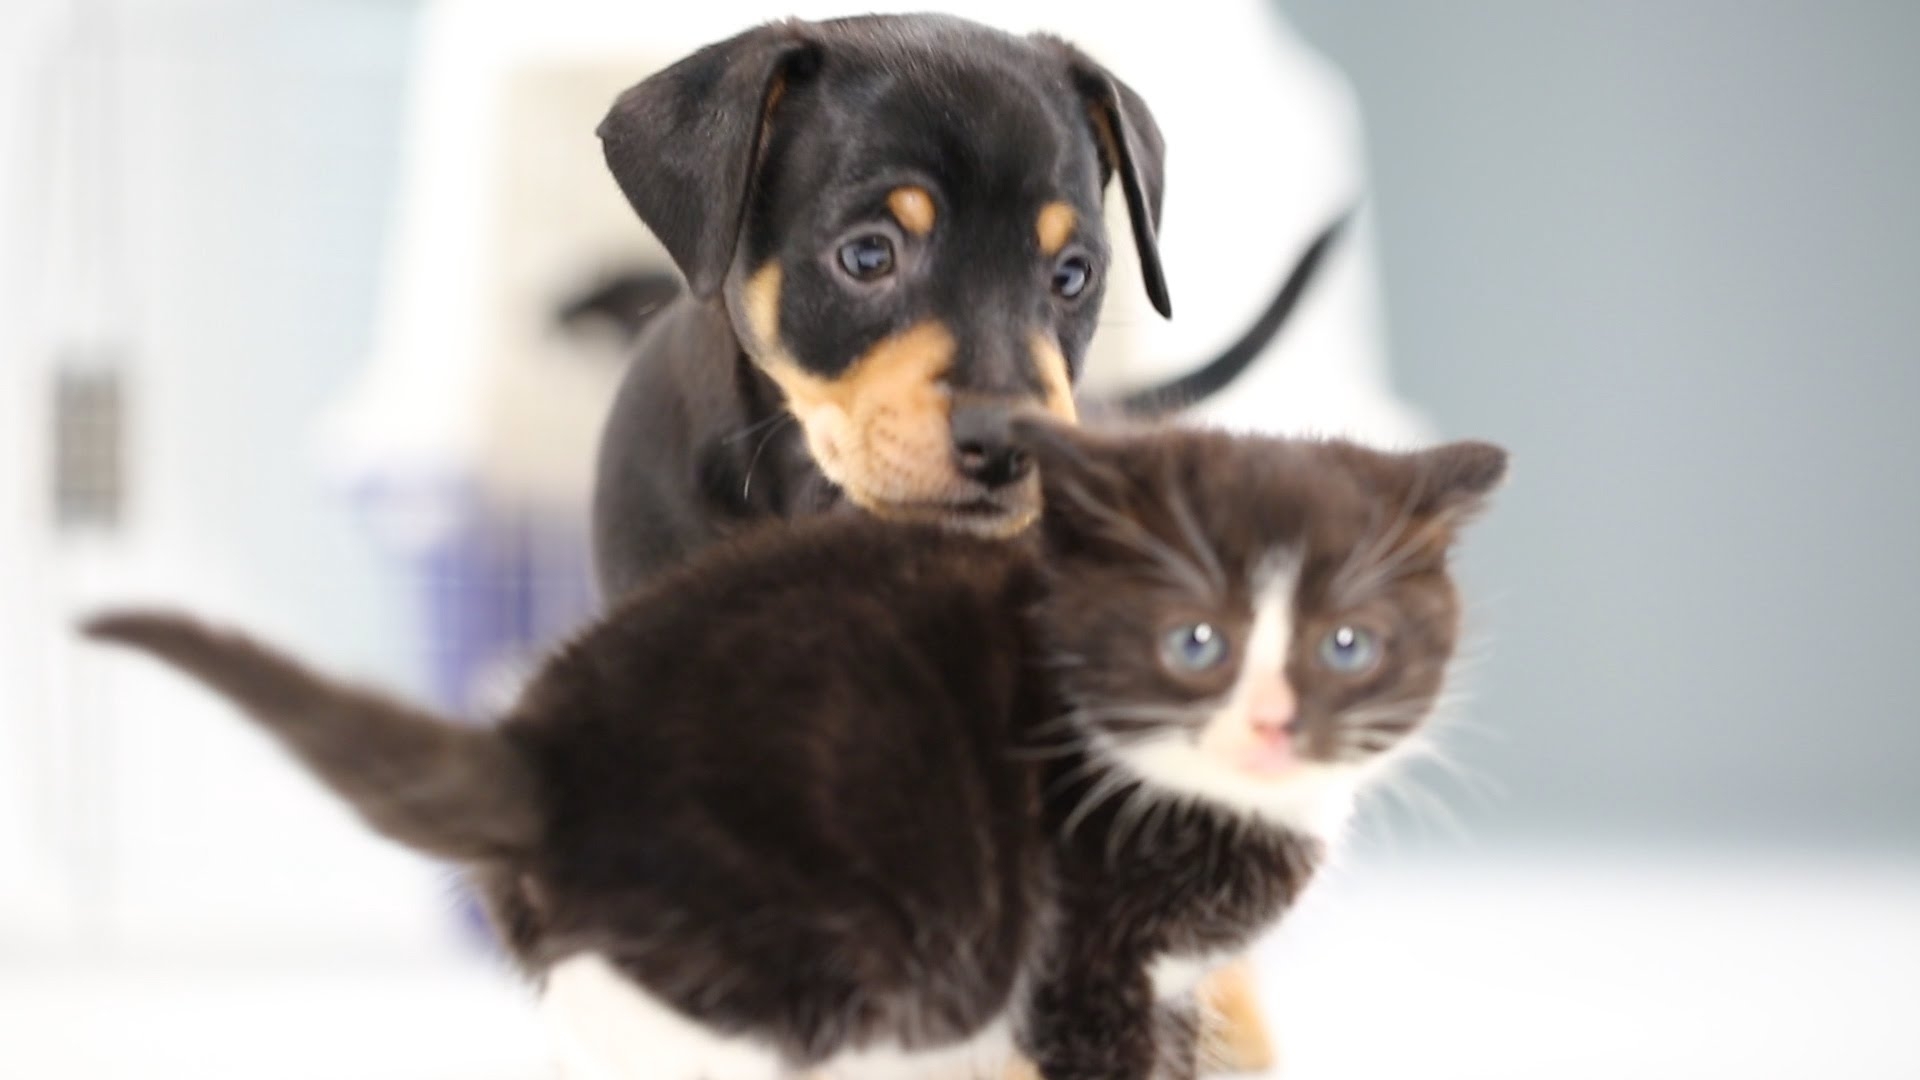 kittens meet puppies for the first time - youtube